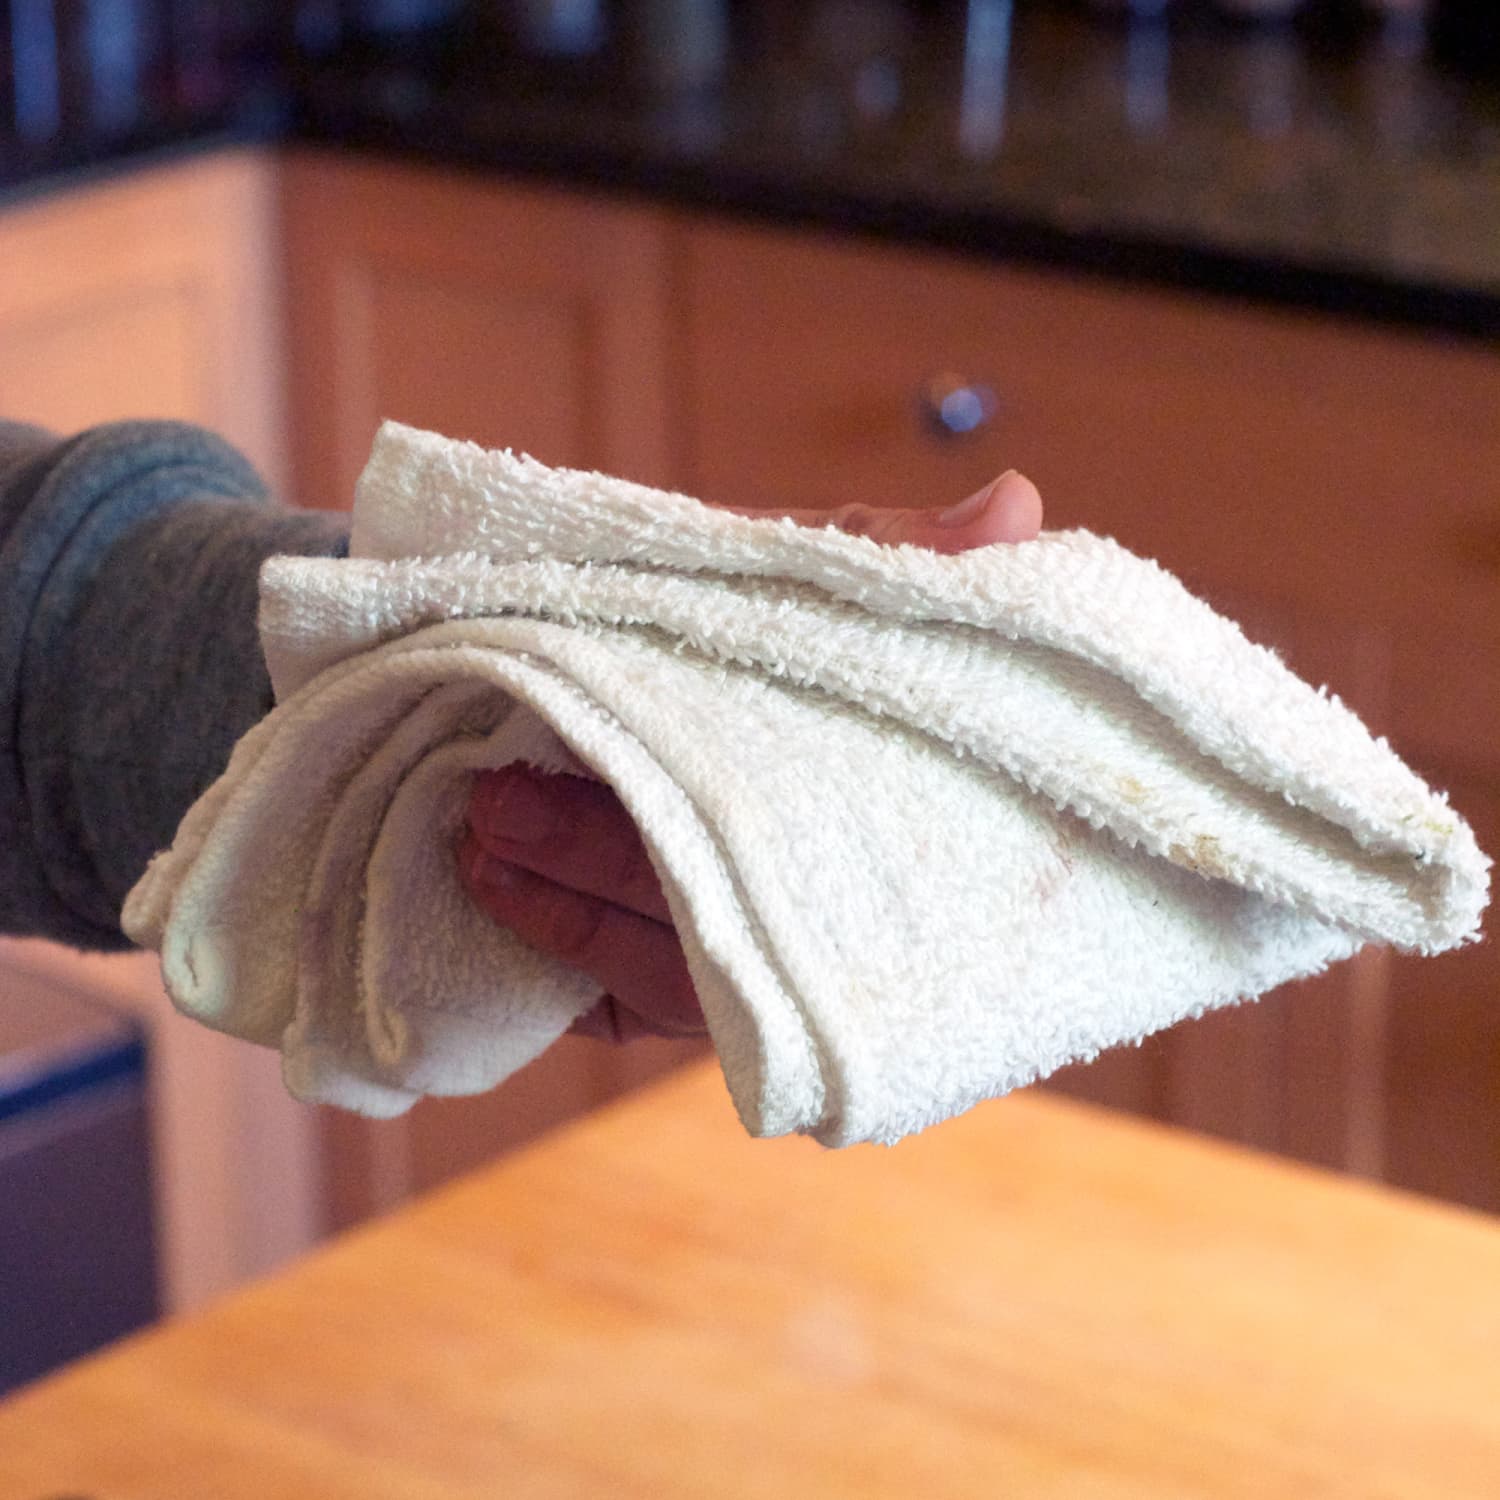 Why You Should Always Cook With a Bar Towel Nearby